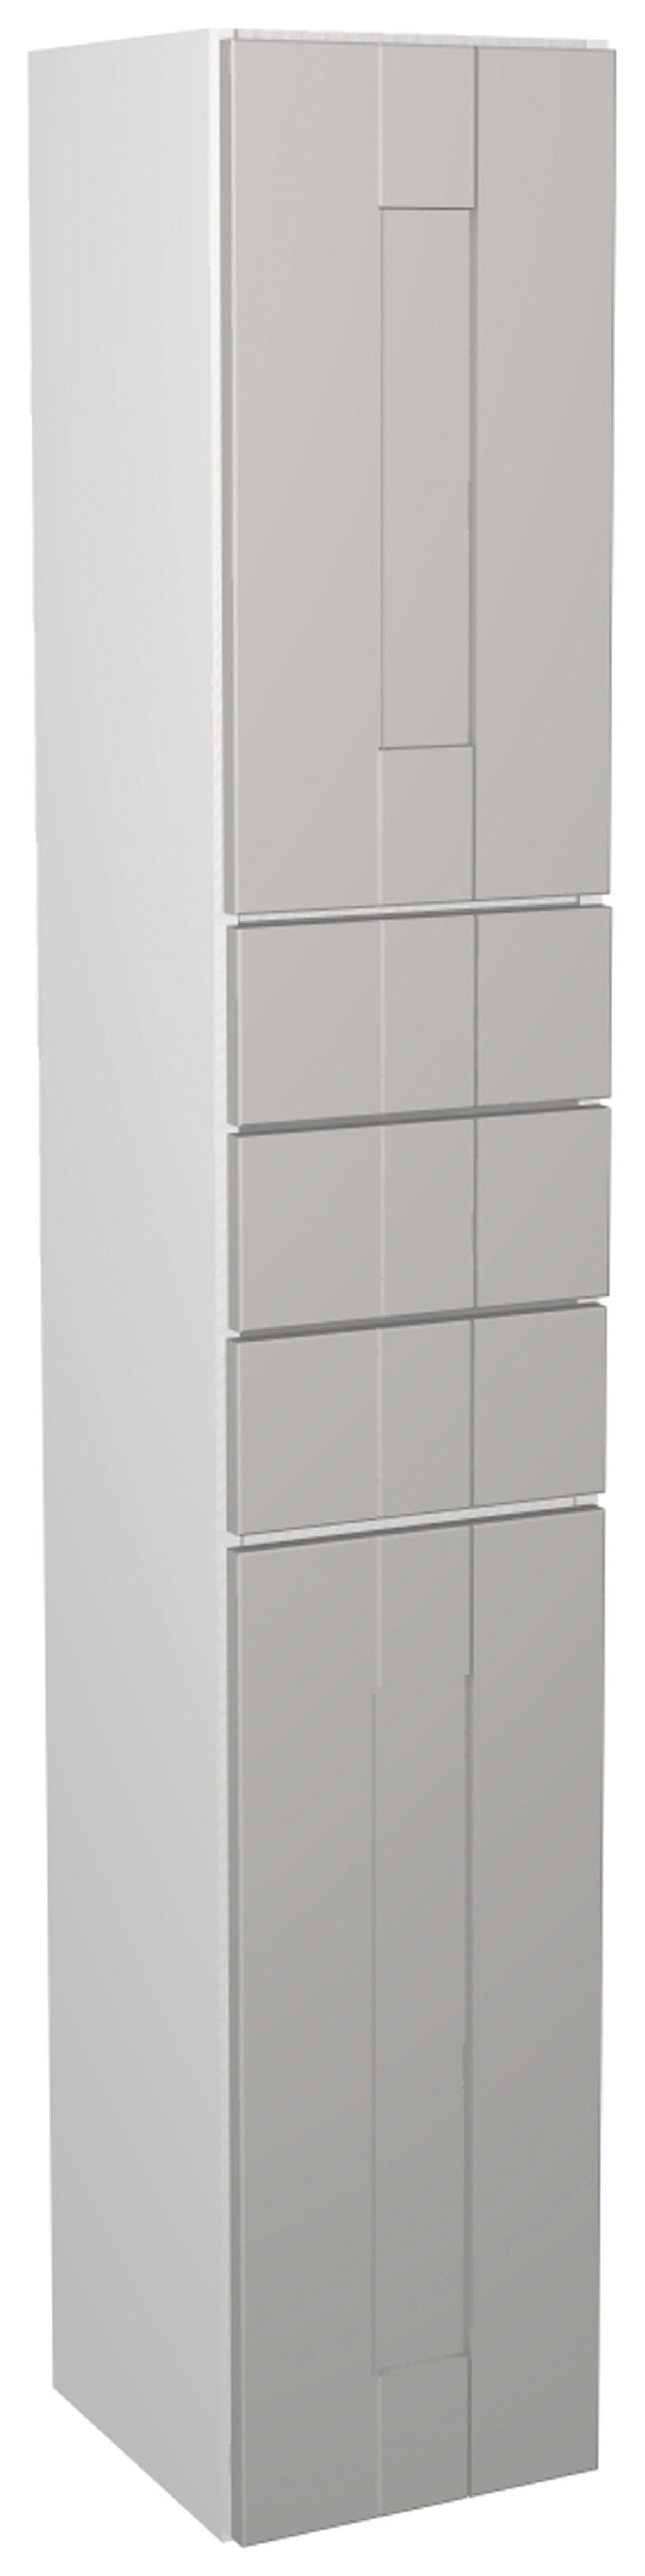 Image of Wickes Vermont Grey Tower Unit with Drawers - 300 x 1762mm